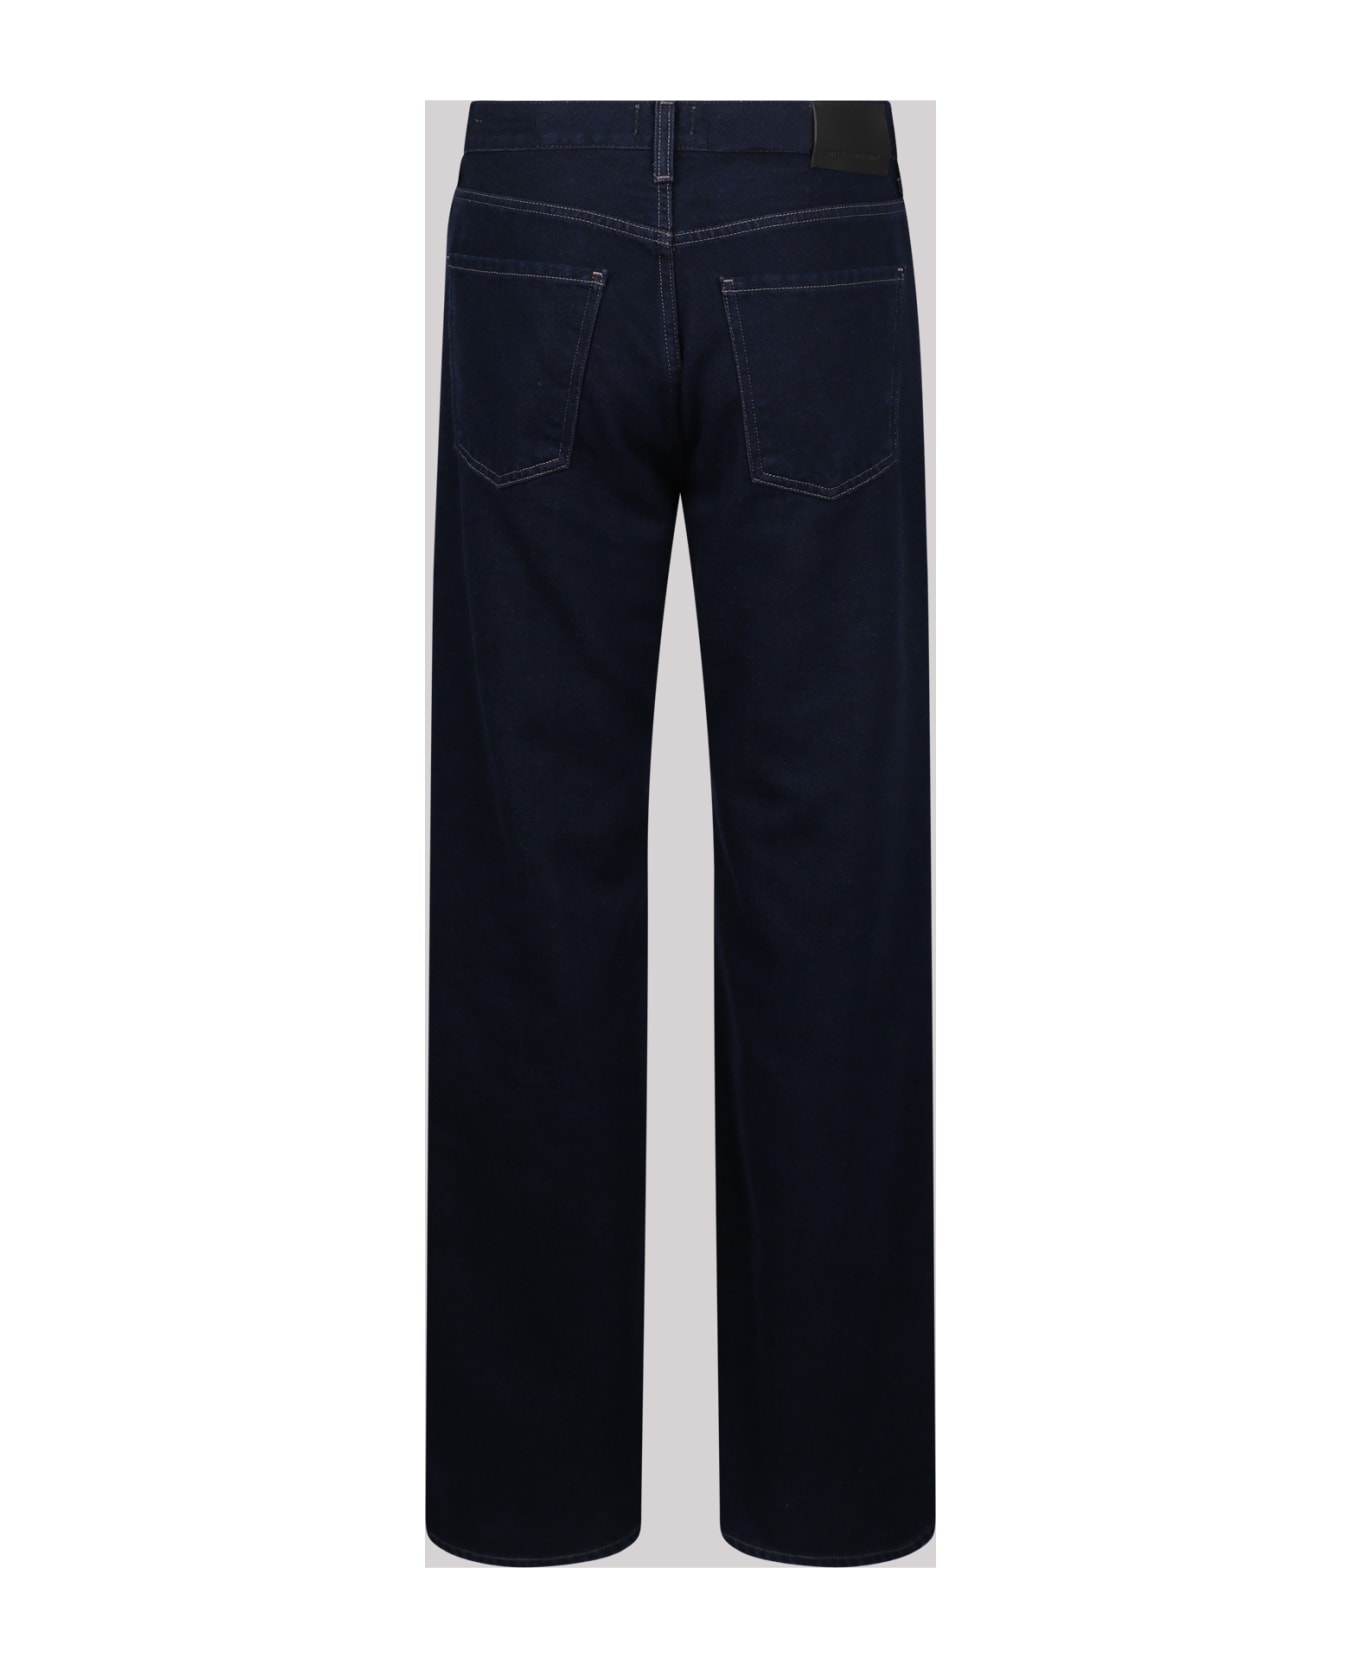 Citizens of Humanity Annina High-waisted Jeans